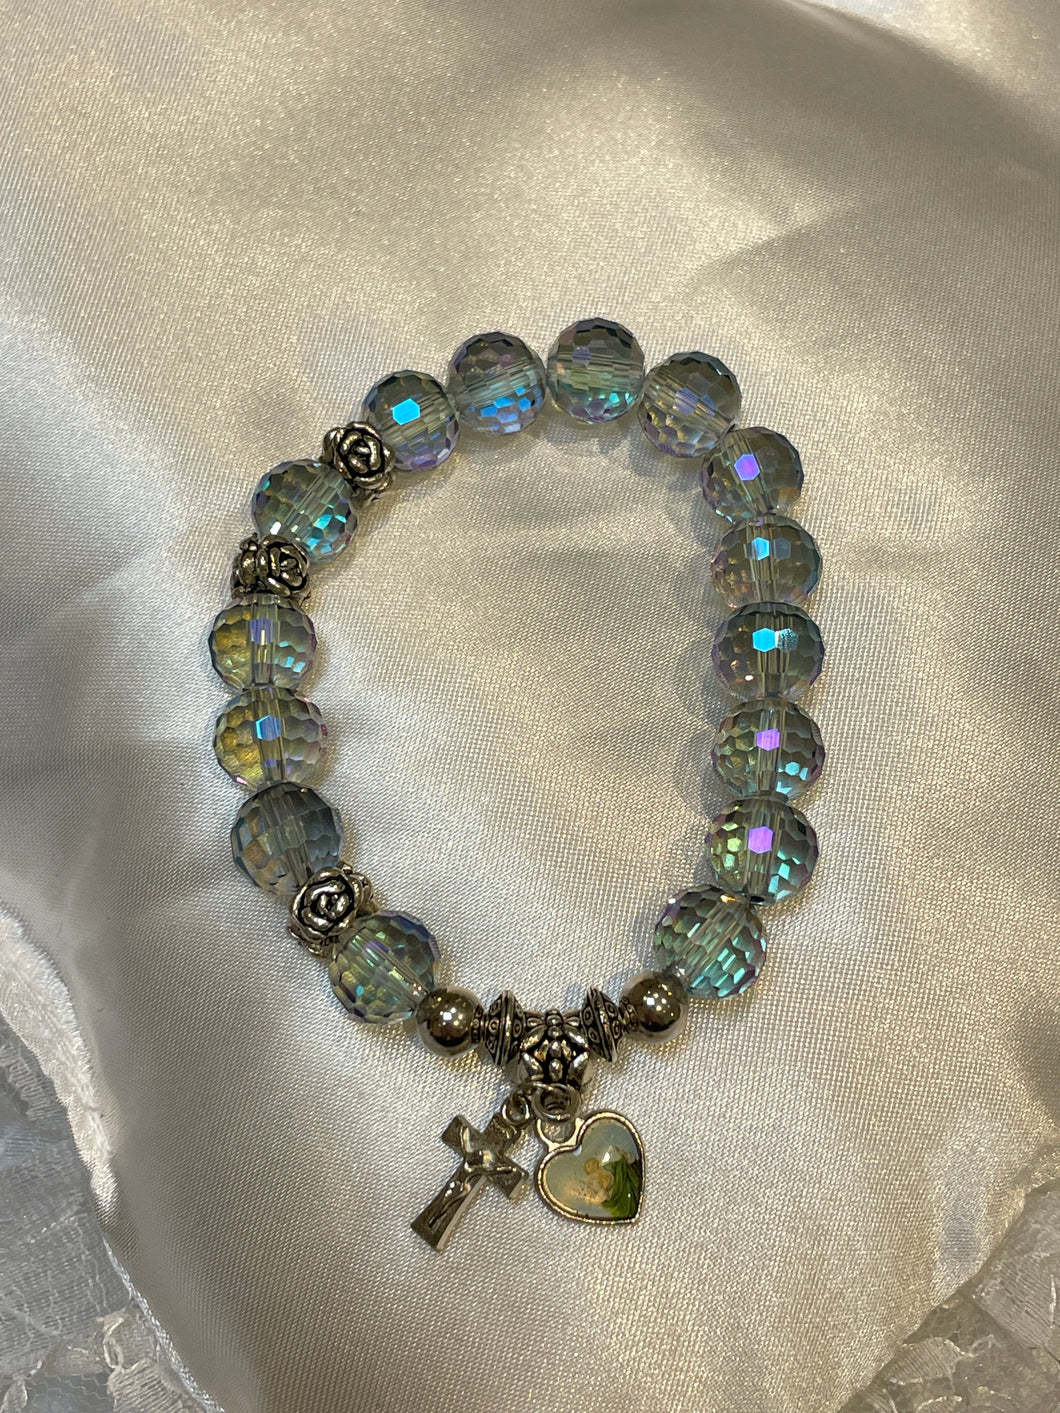 Translucent Blue Crystal Rosary Bracelet with Jesus the Good Shepherd and Crucifix Charms